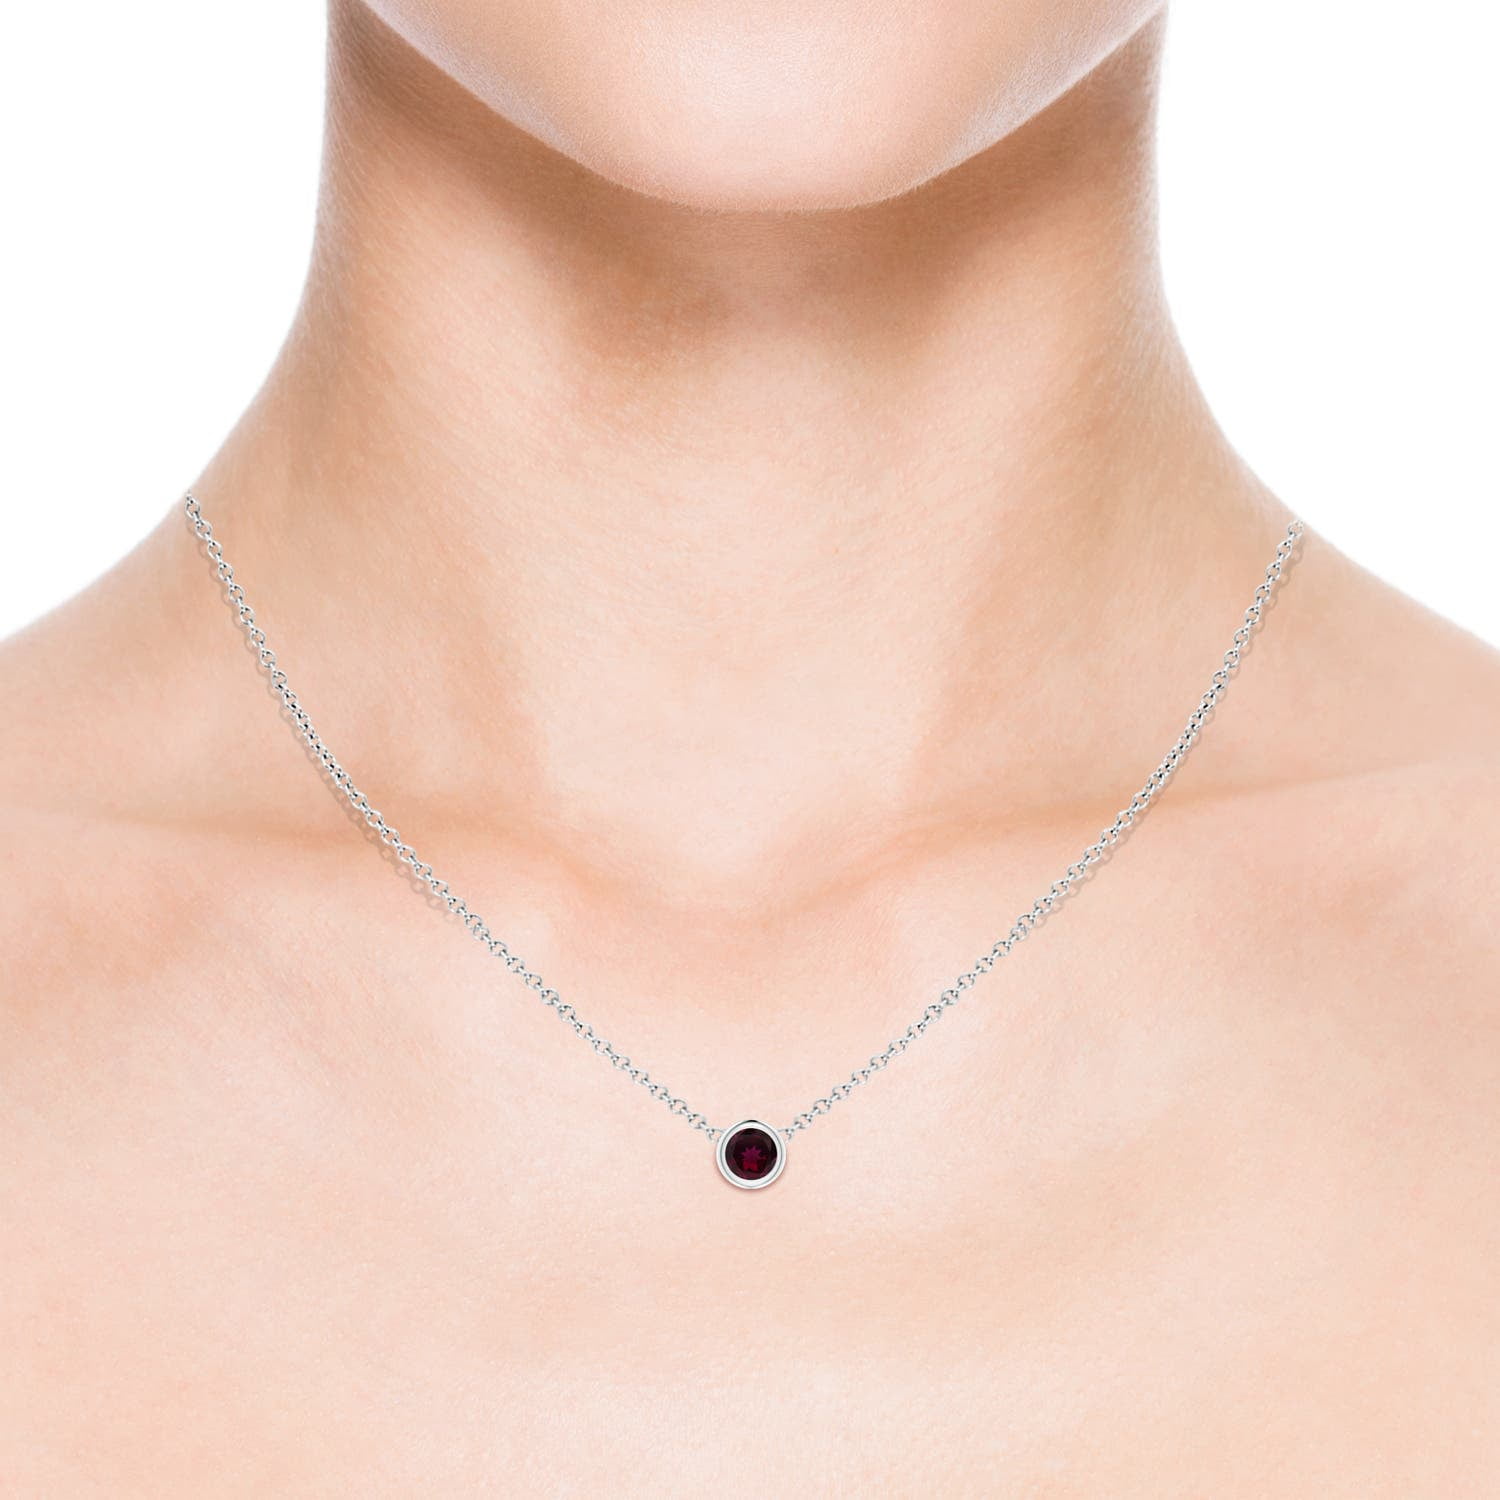 Angara Natural Garnet Solitaire Pendant Necklace for Women, Girls in  Platinum (Grade-AA 7x5mm) January Birthstone Jewelry Gift for Her 